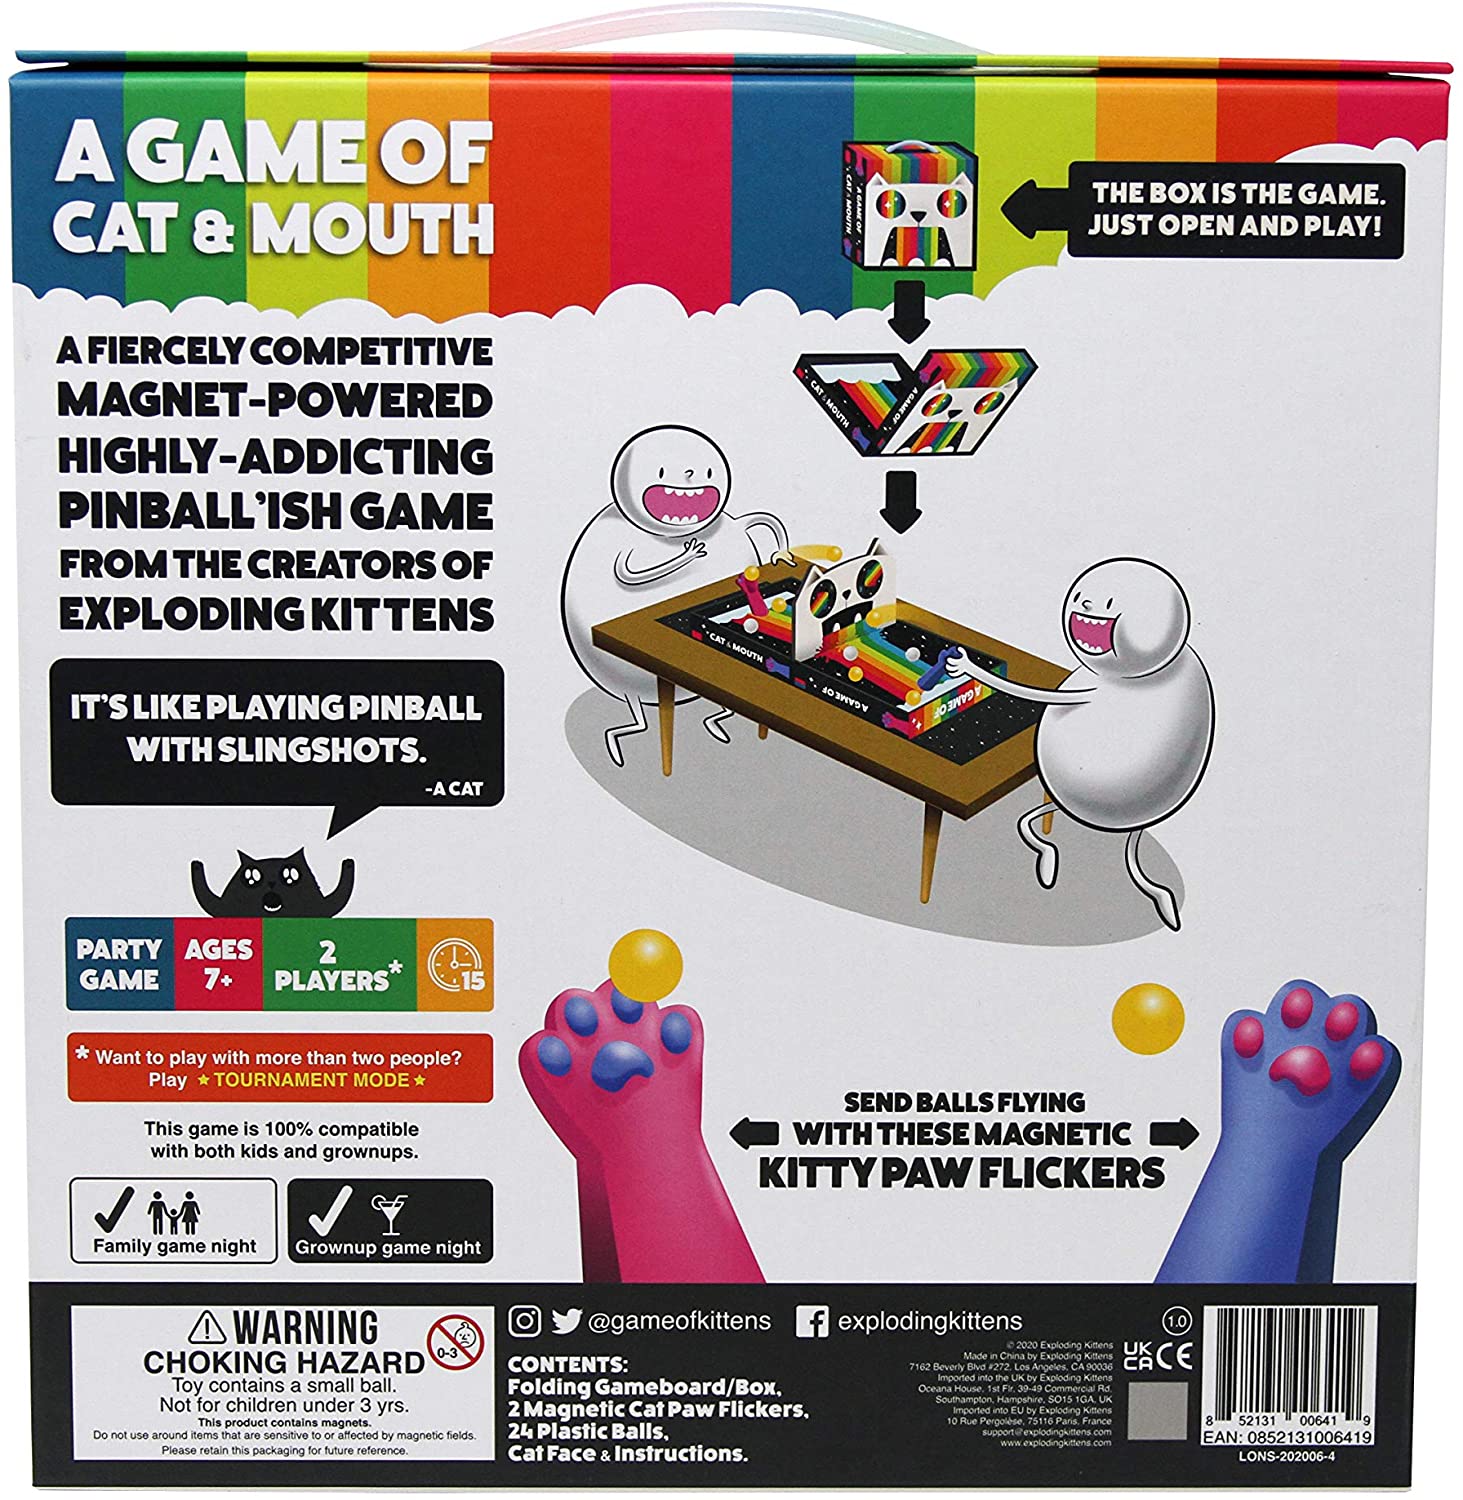 A game of cat & mouth - 